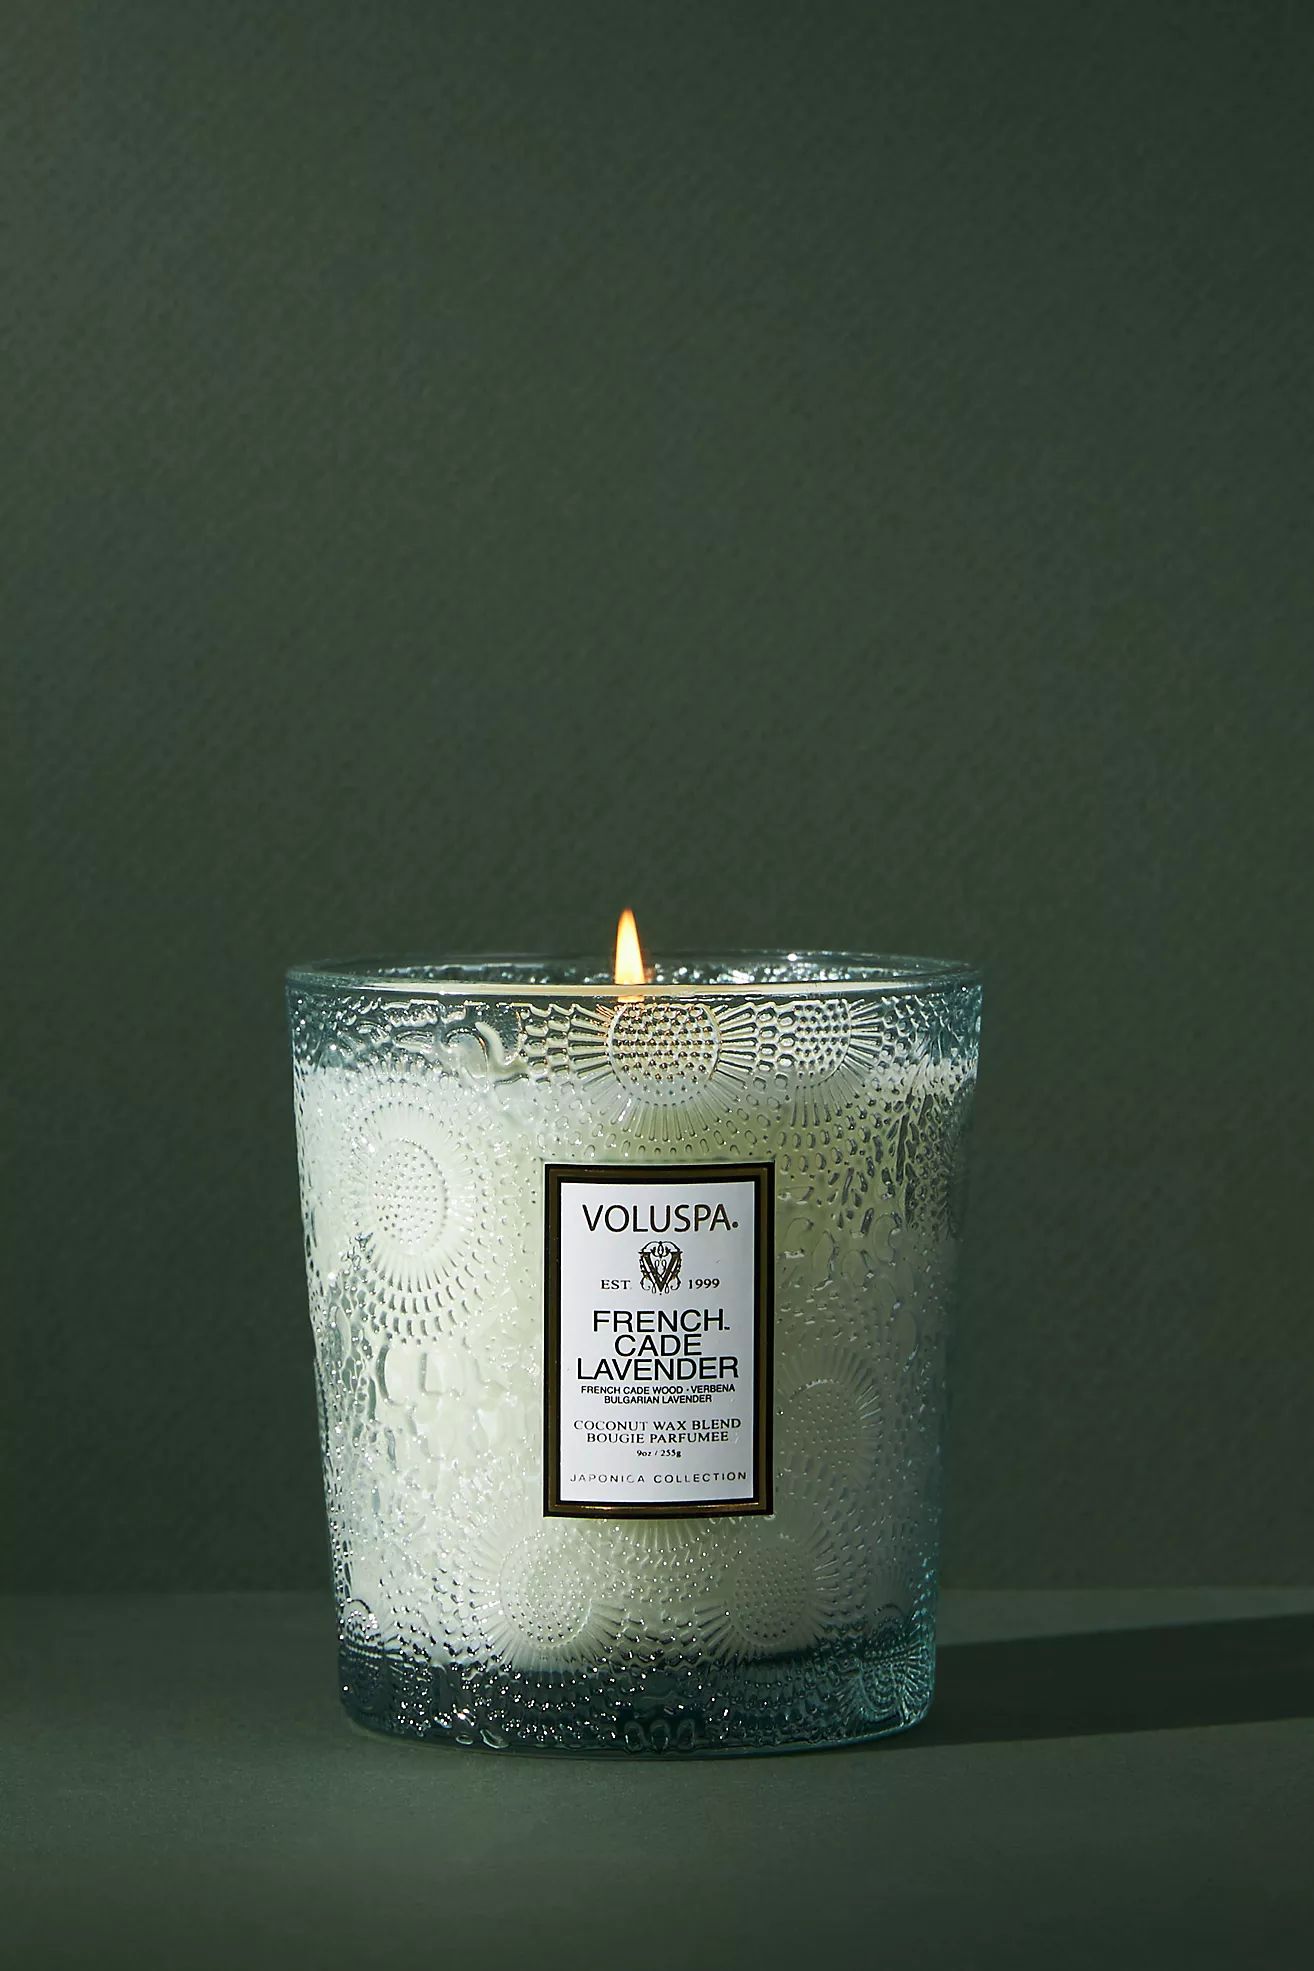 Voluspa Japonica French Cade & Lavender Boxed Candle | Anthropologie (US)